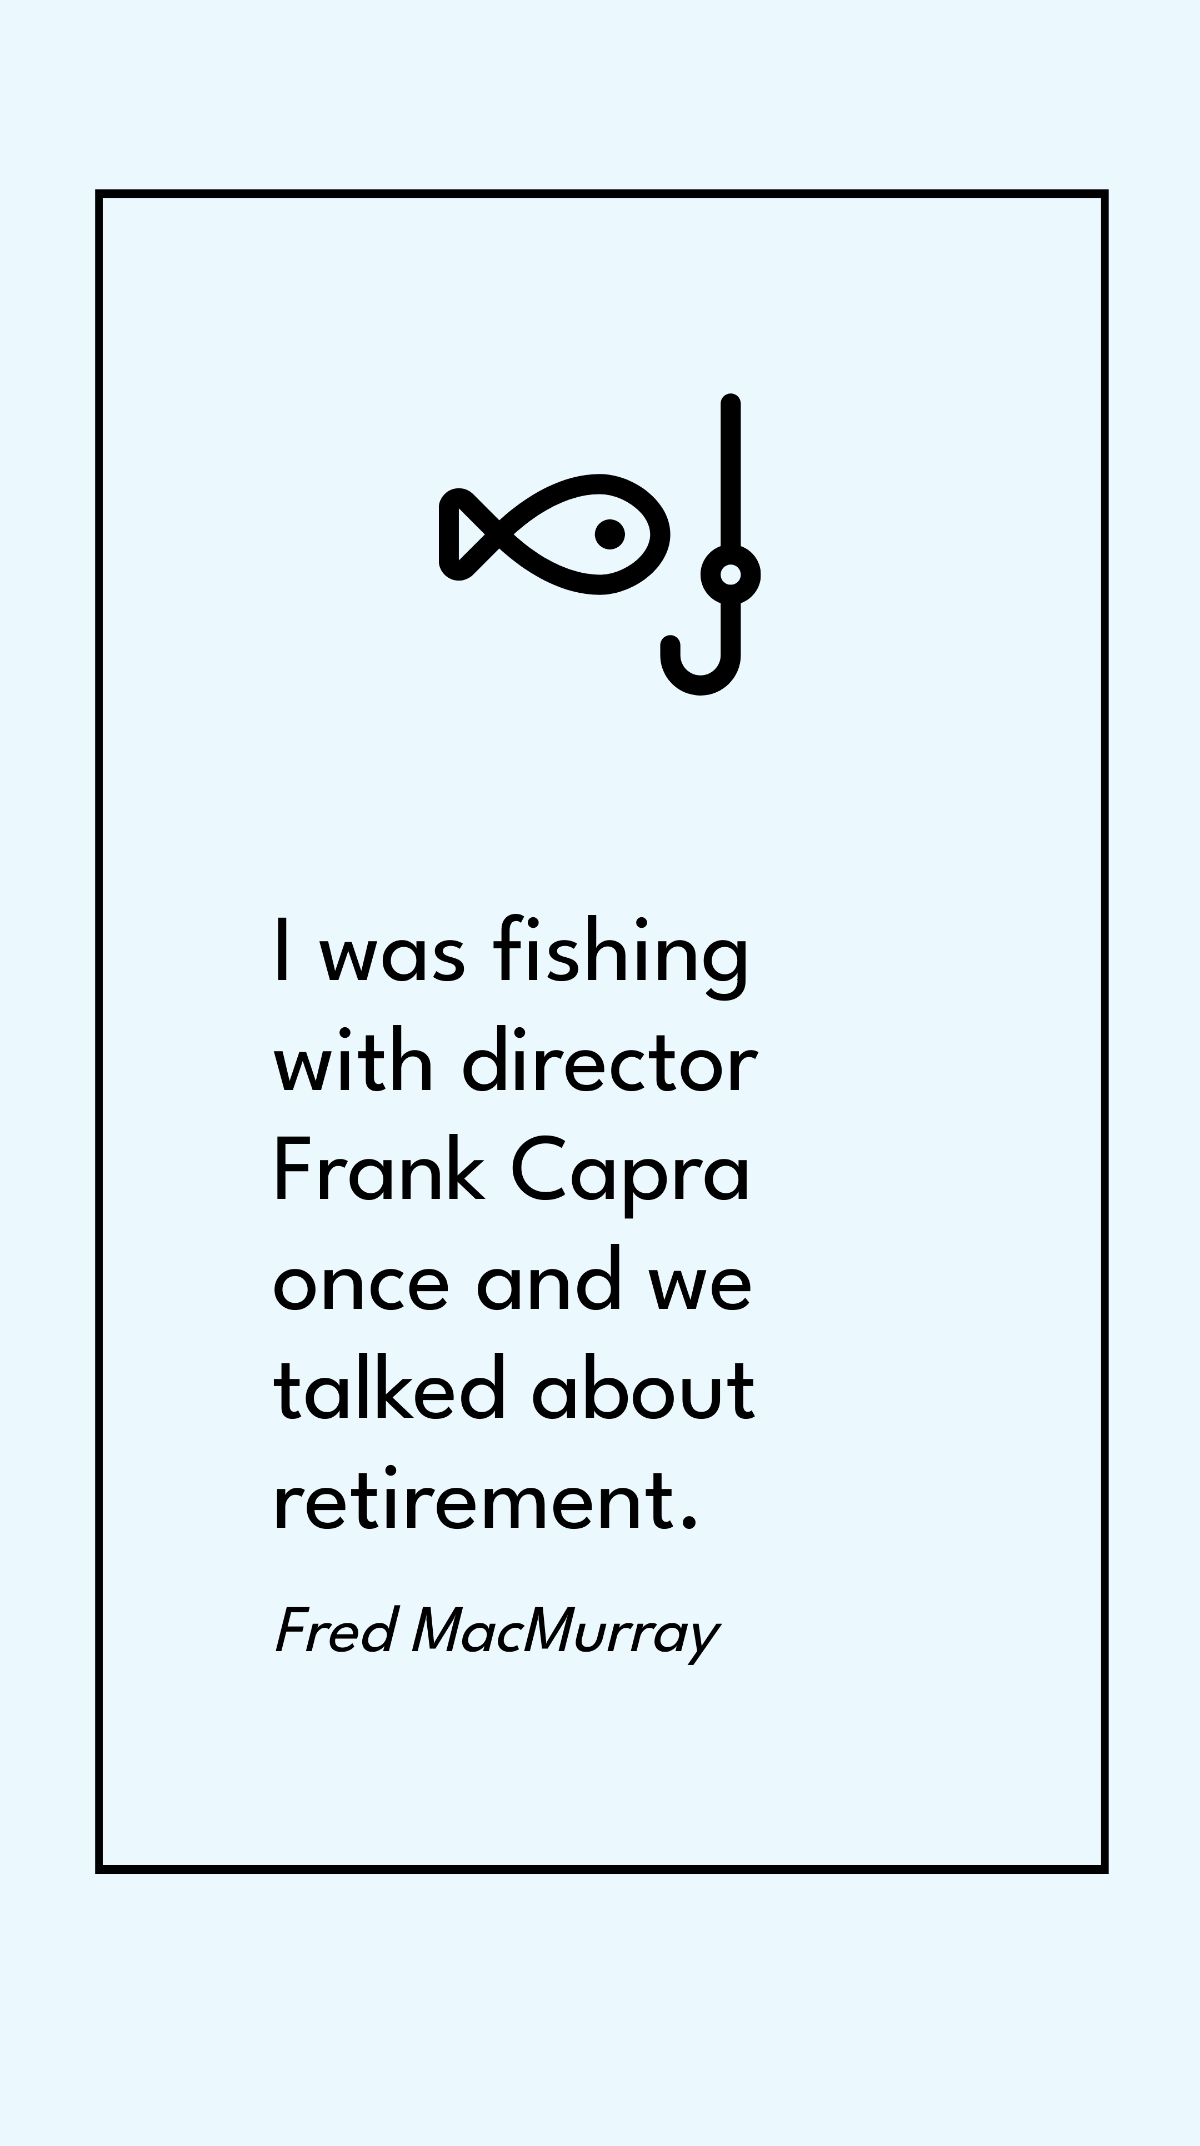 Fred MacMurray - I was fishing with director Frank Capra once and we talked about retirement.